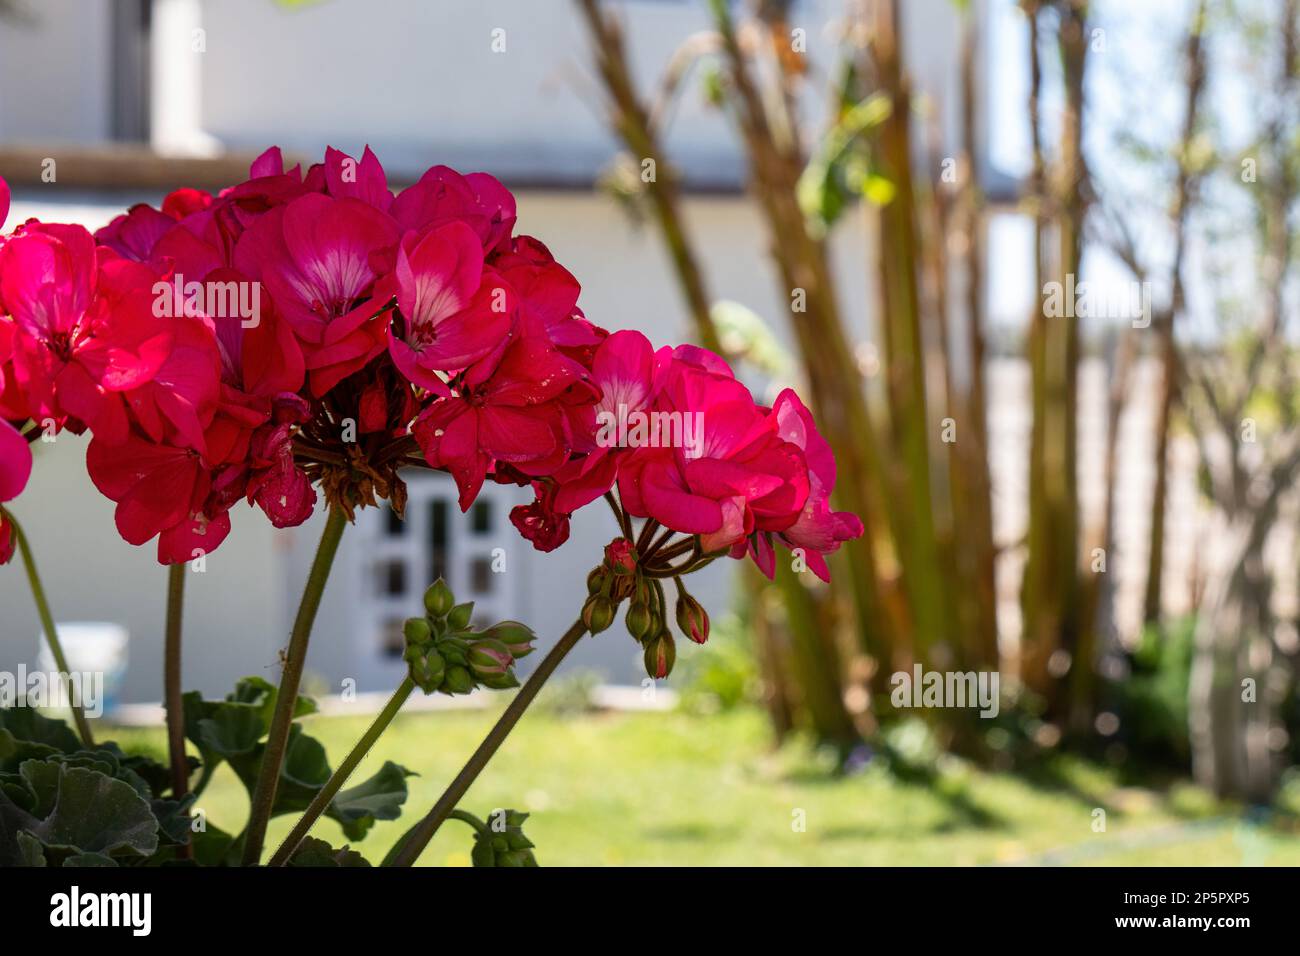 A Beautiful red geranium flowers in a garden in a sunny day Stock Photo